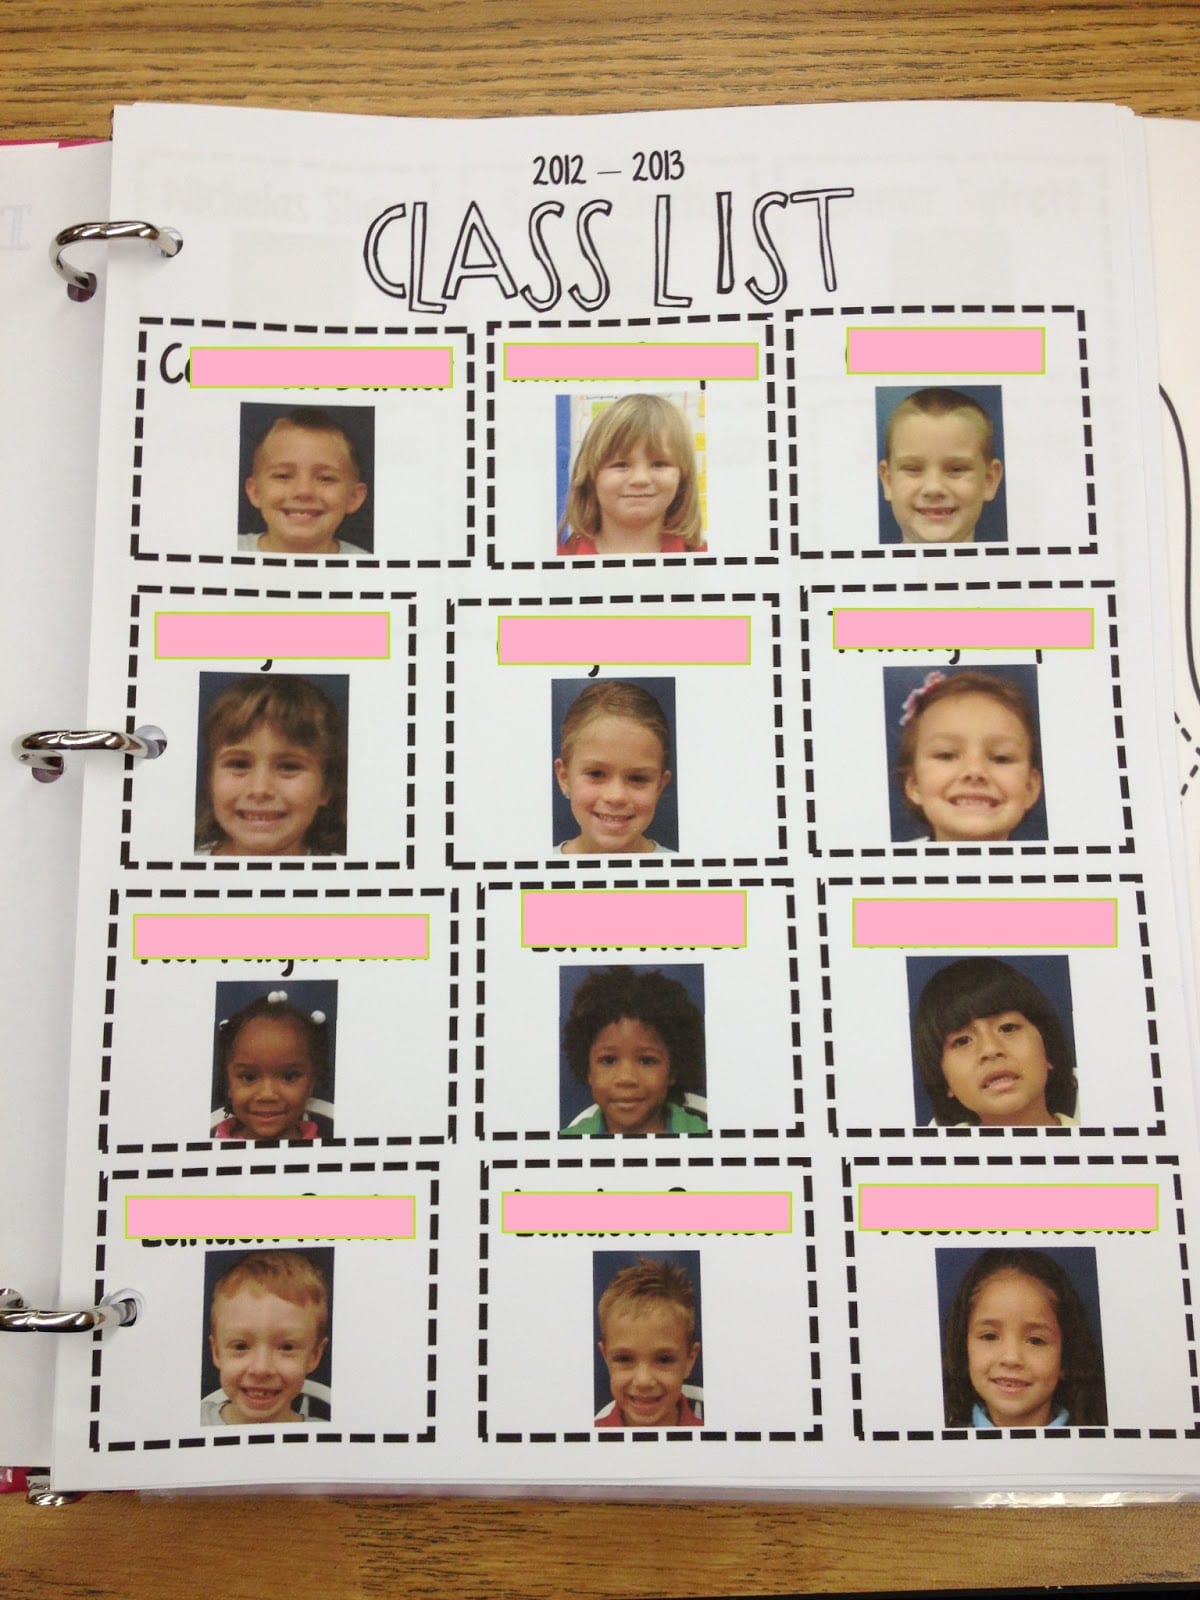 A class roster featuring kids' faces for teaching 6th grade.